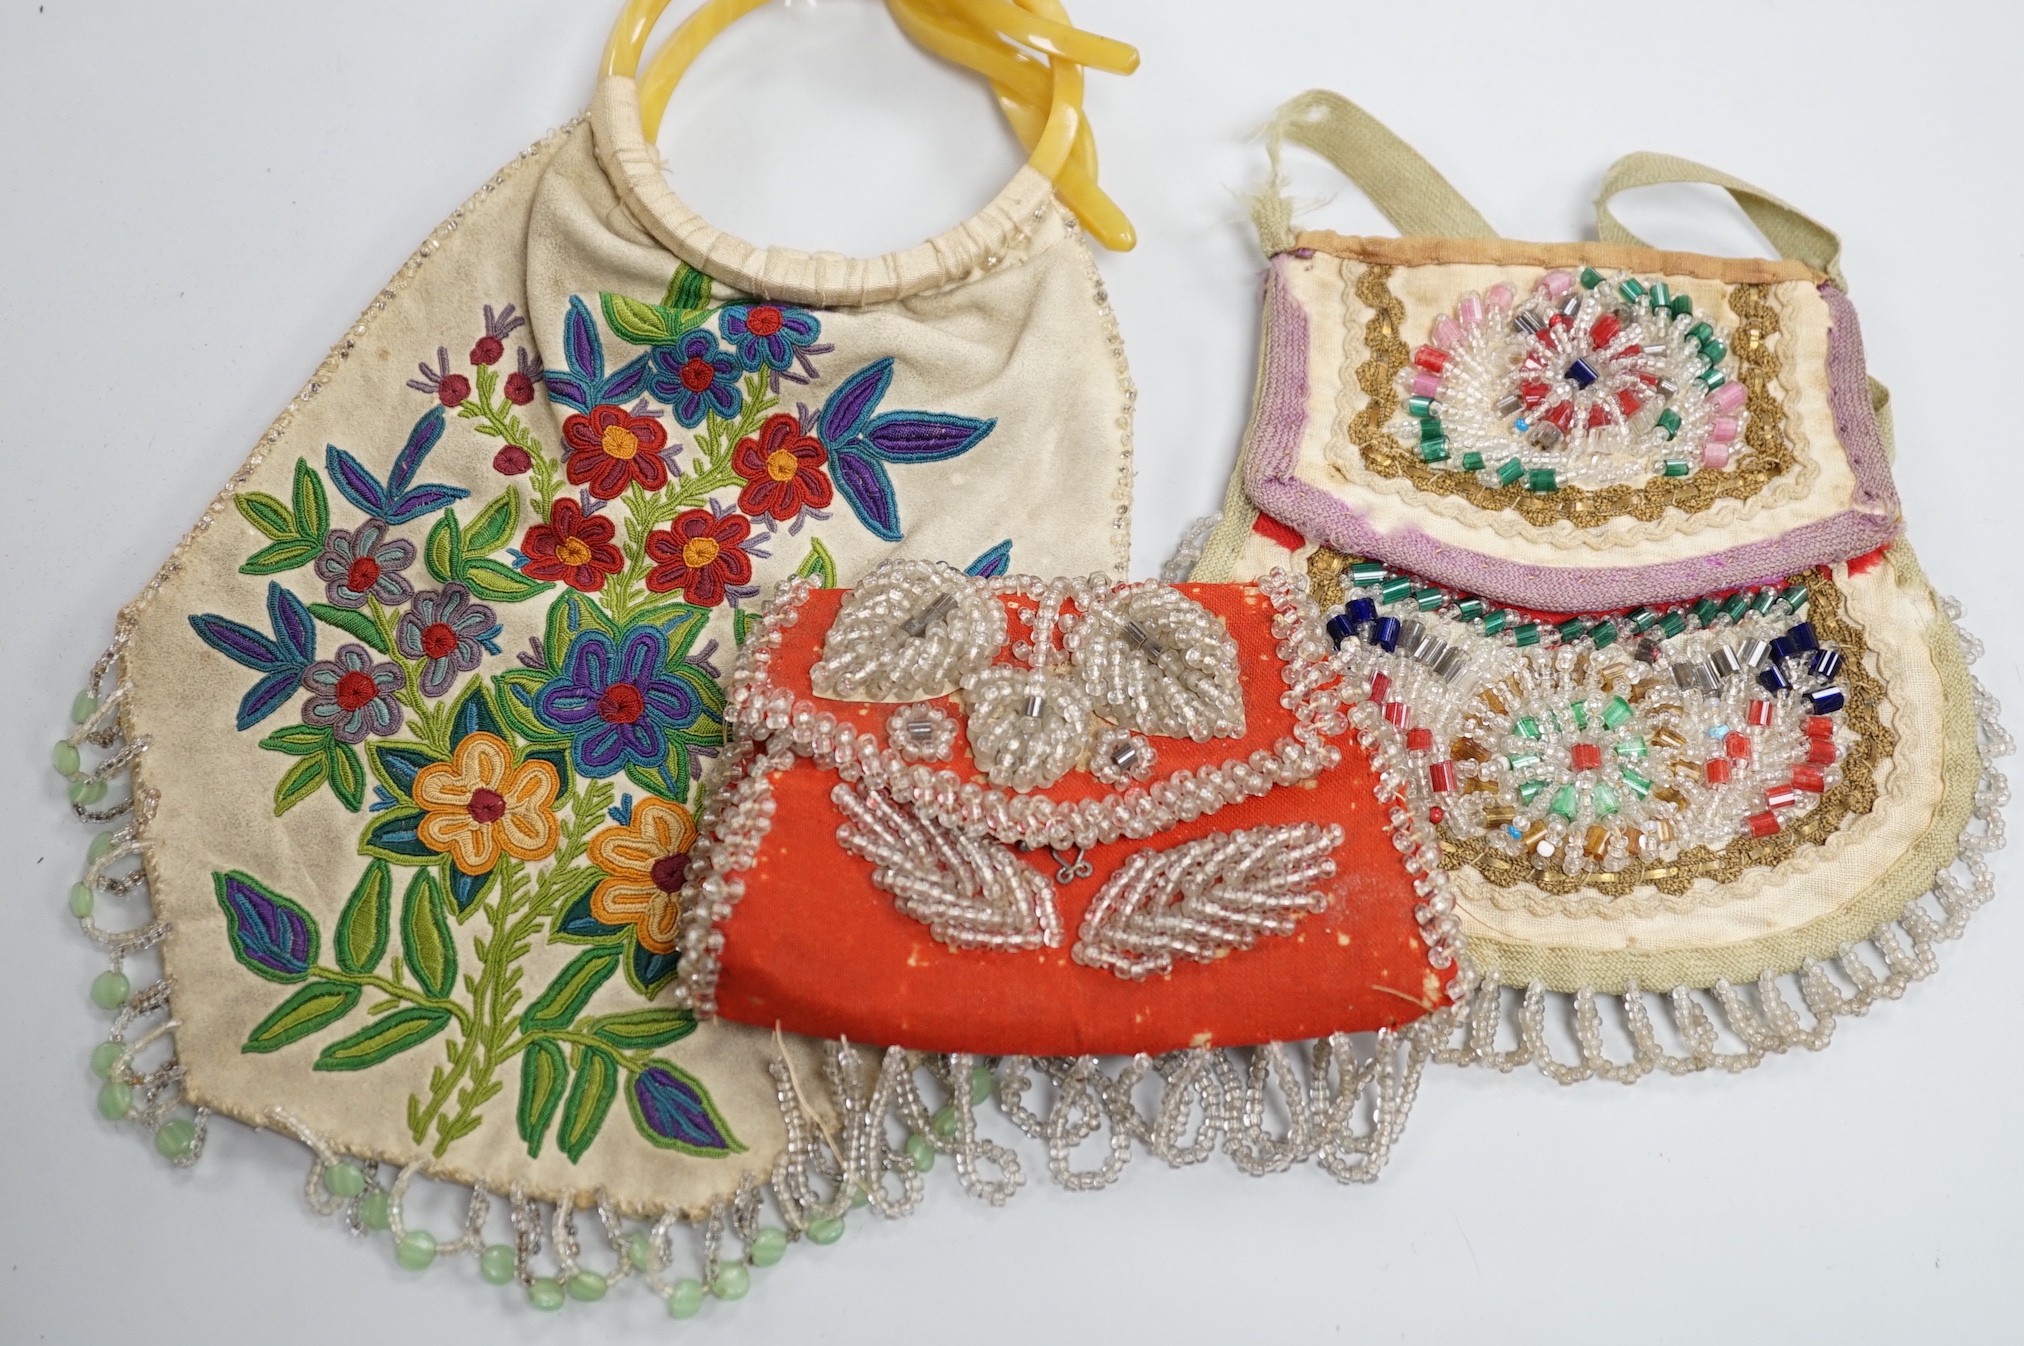 A mid to late 19th century Iroquois, North American/Canadian Indian glass beadwork bag on linen, together with a smaller red wool beaded purse and a 20th century suede embroidered bag with beaded fringe